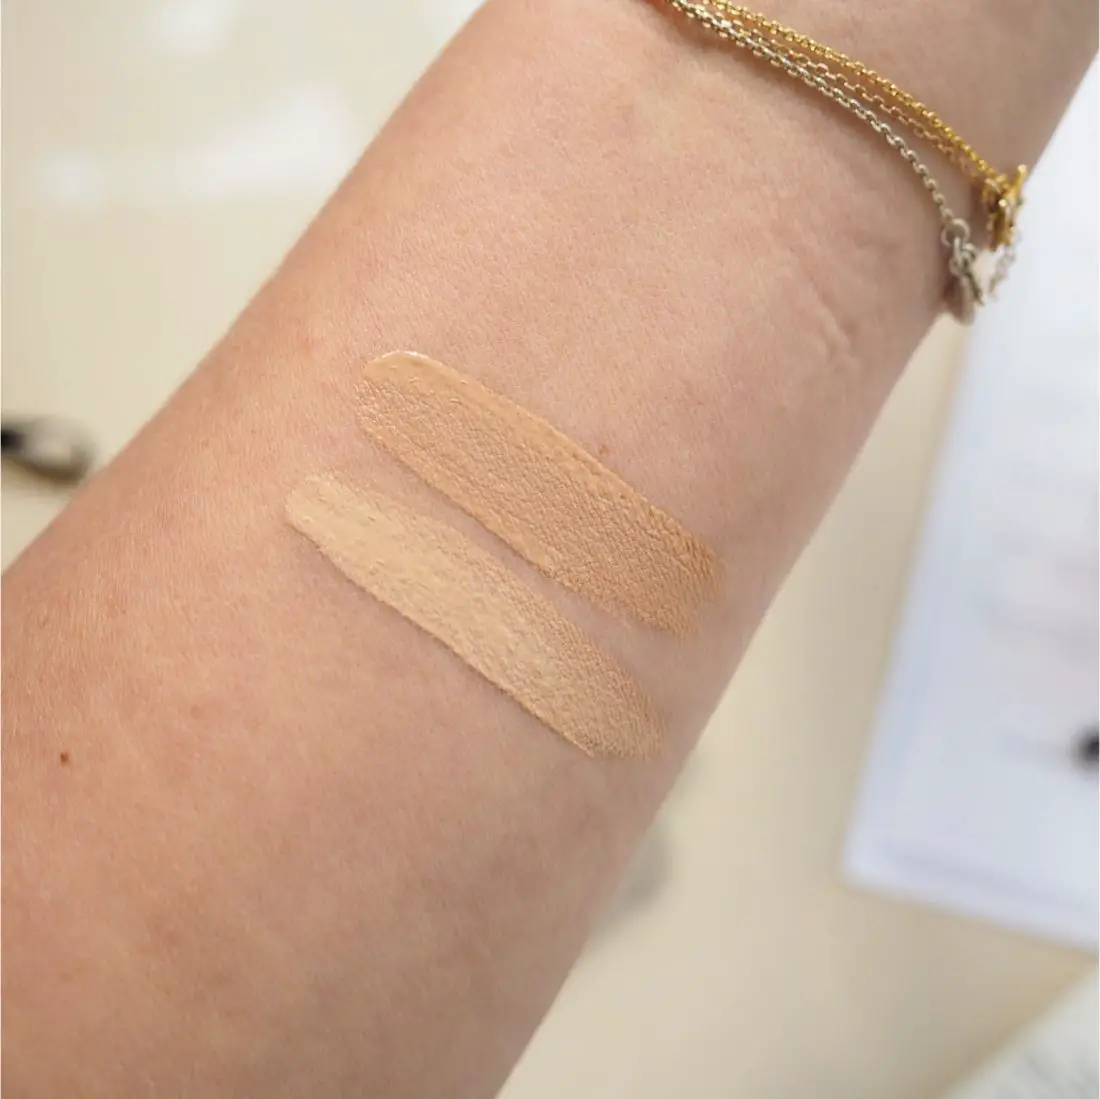 Chanel CC Cream Correction Complete SPF 30 Review  Swatches  Musings of a  Muse